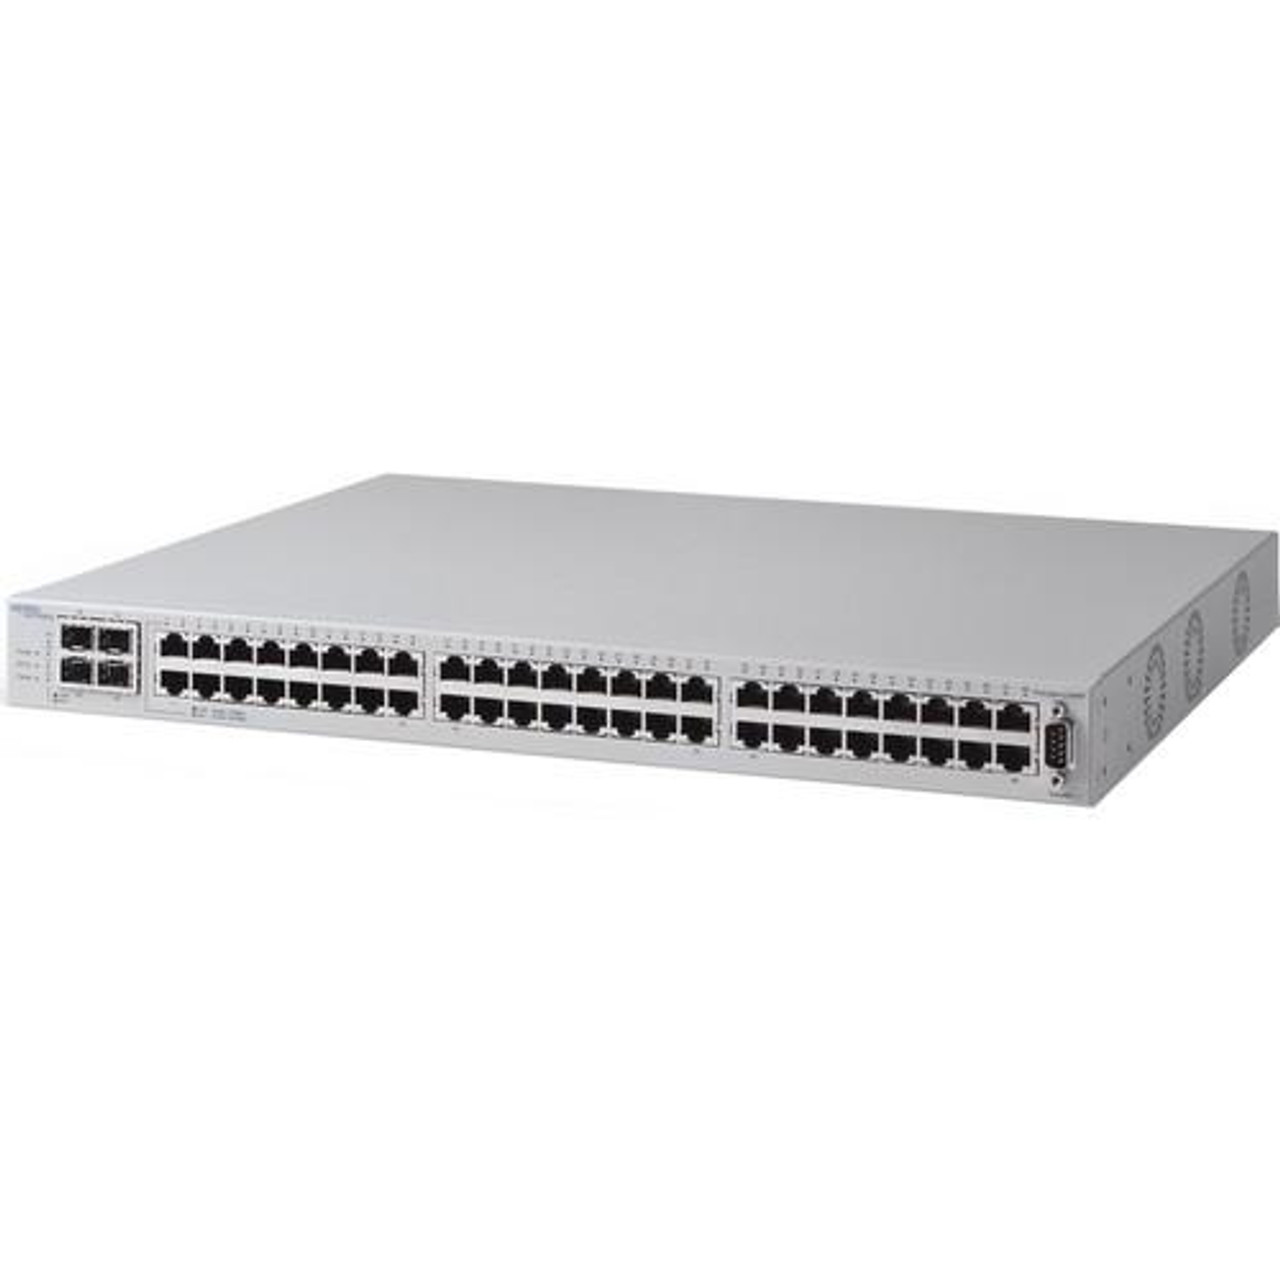 RMDJ1412E02 Nortel 1648T Fast Ethernet Routing External Switch with 48-Ports 10/100TX Ports 4 SFP (Refurbished)